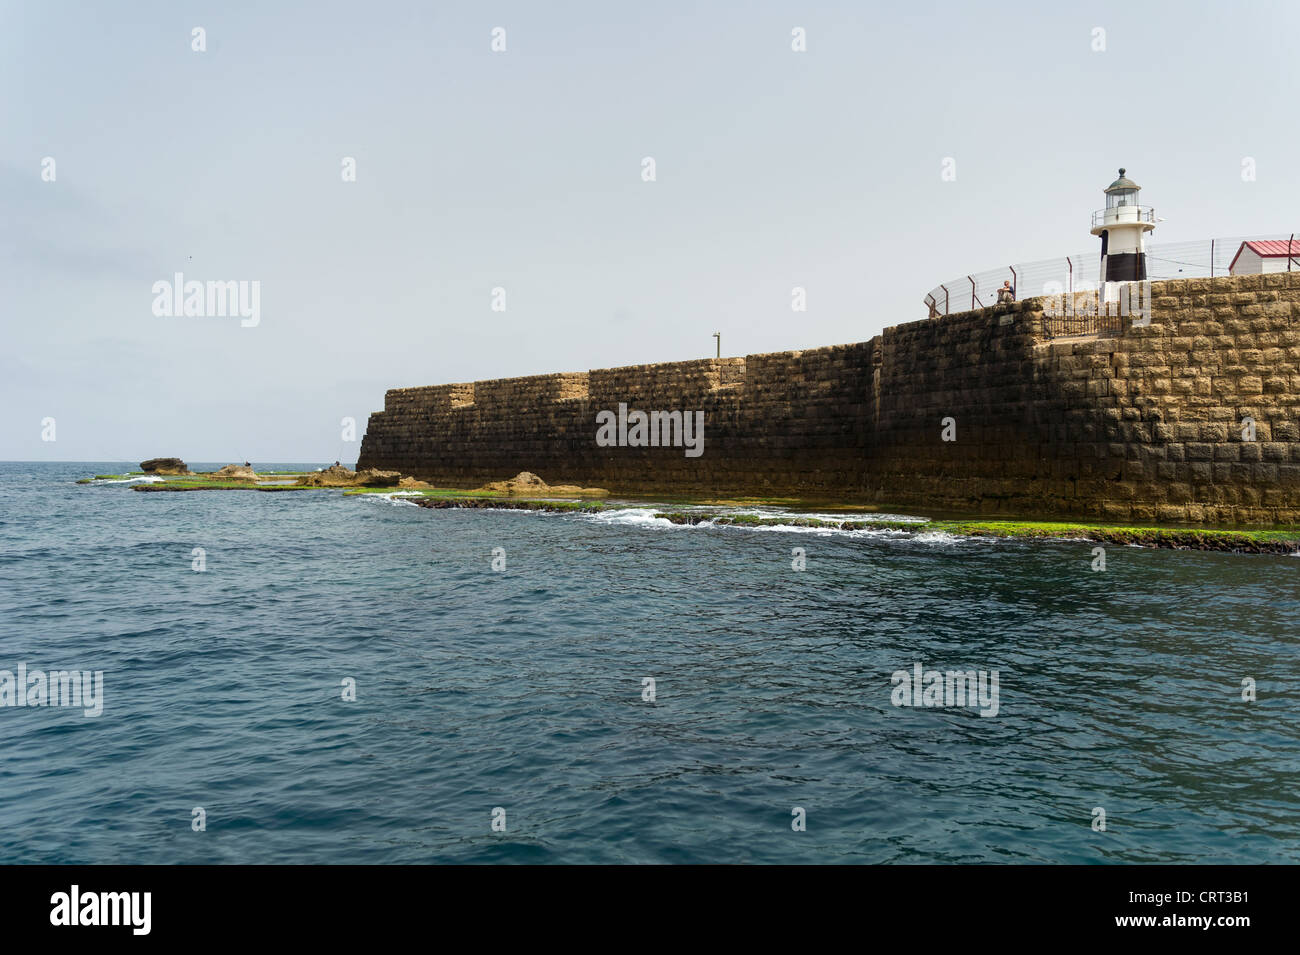 The view of historic sea walls in ancient Acre (Akko), Israel Stock Photo